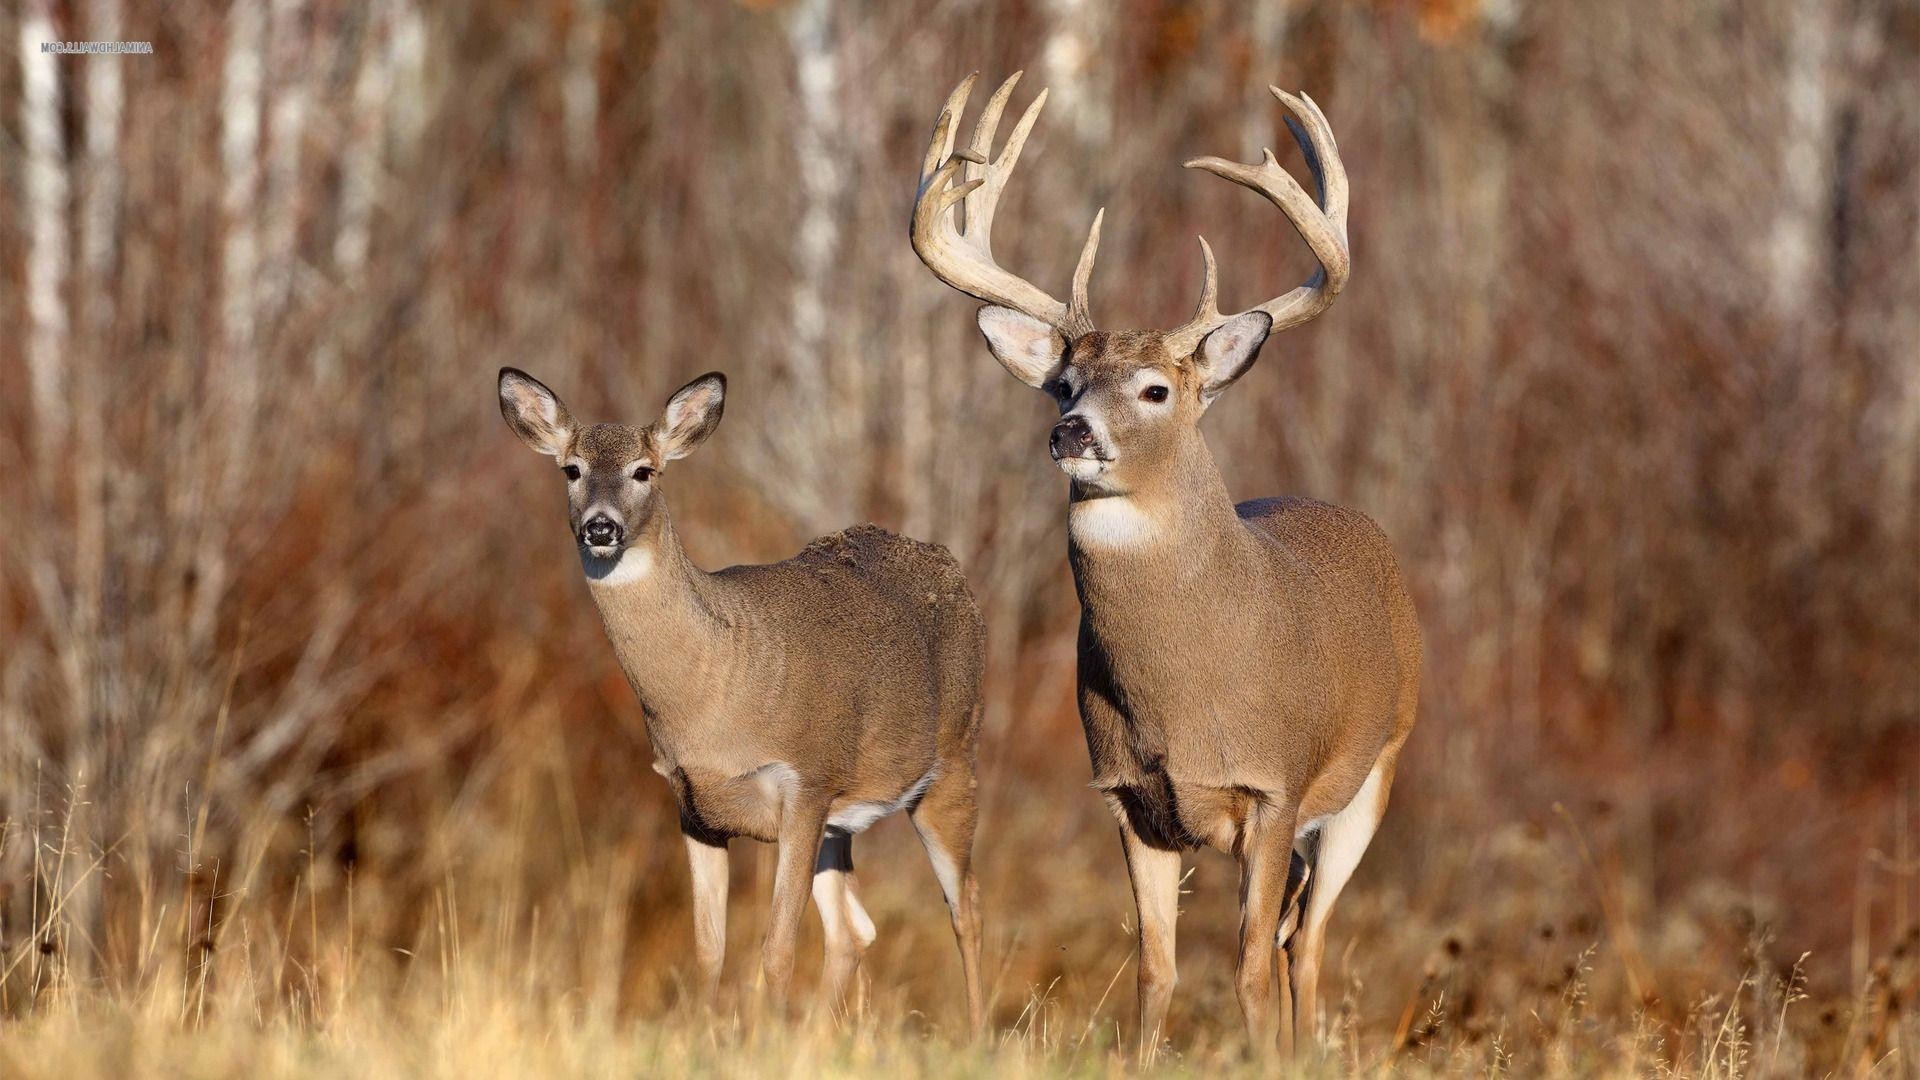 1920x1080 free whitetail deer wallpaper 10 - flipped | Images And Wallpapers .